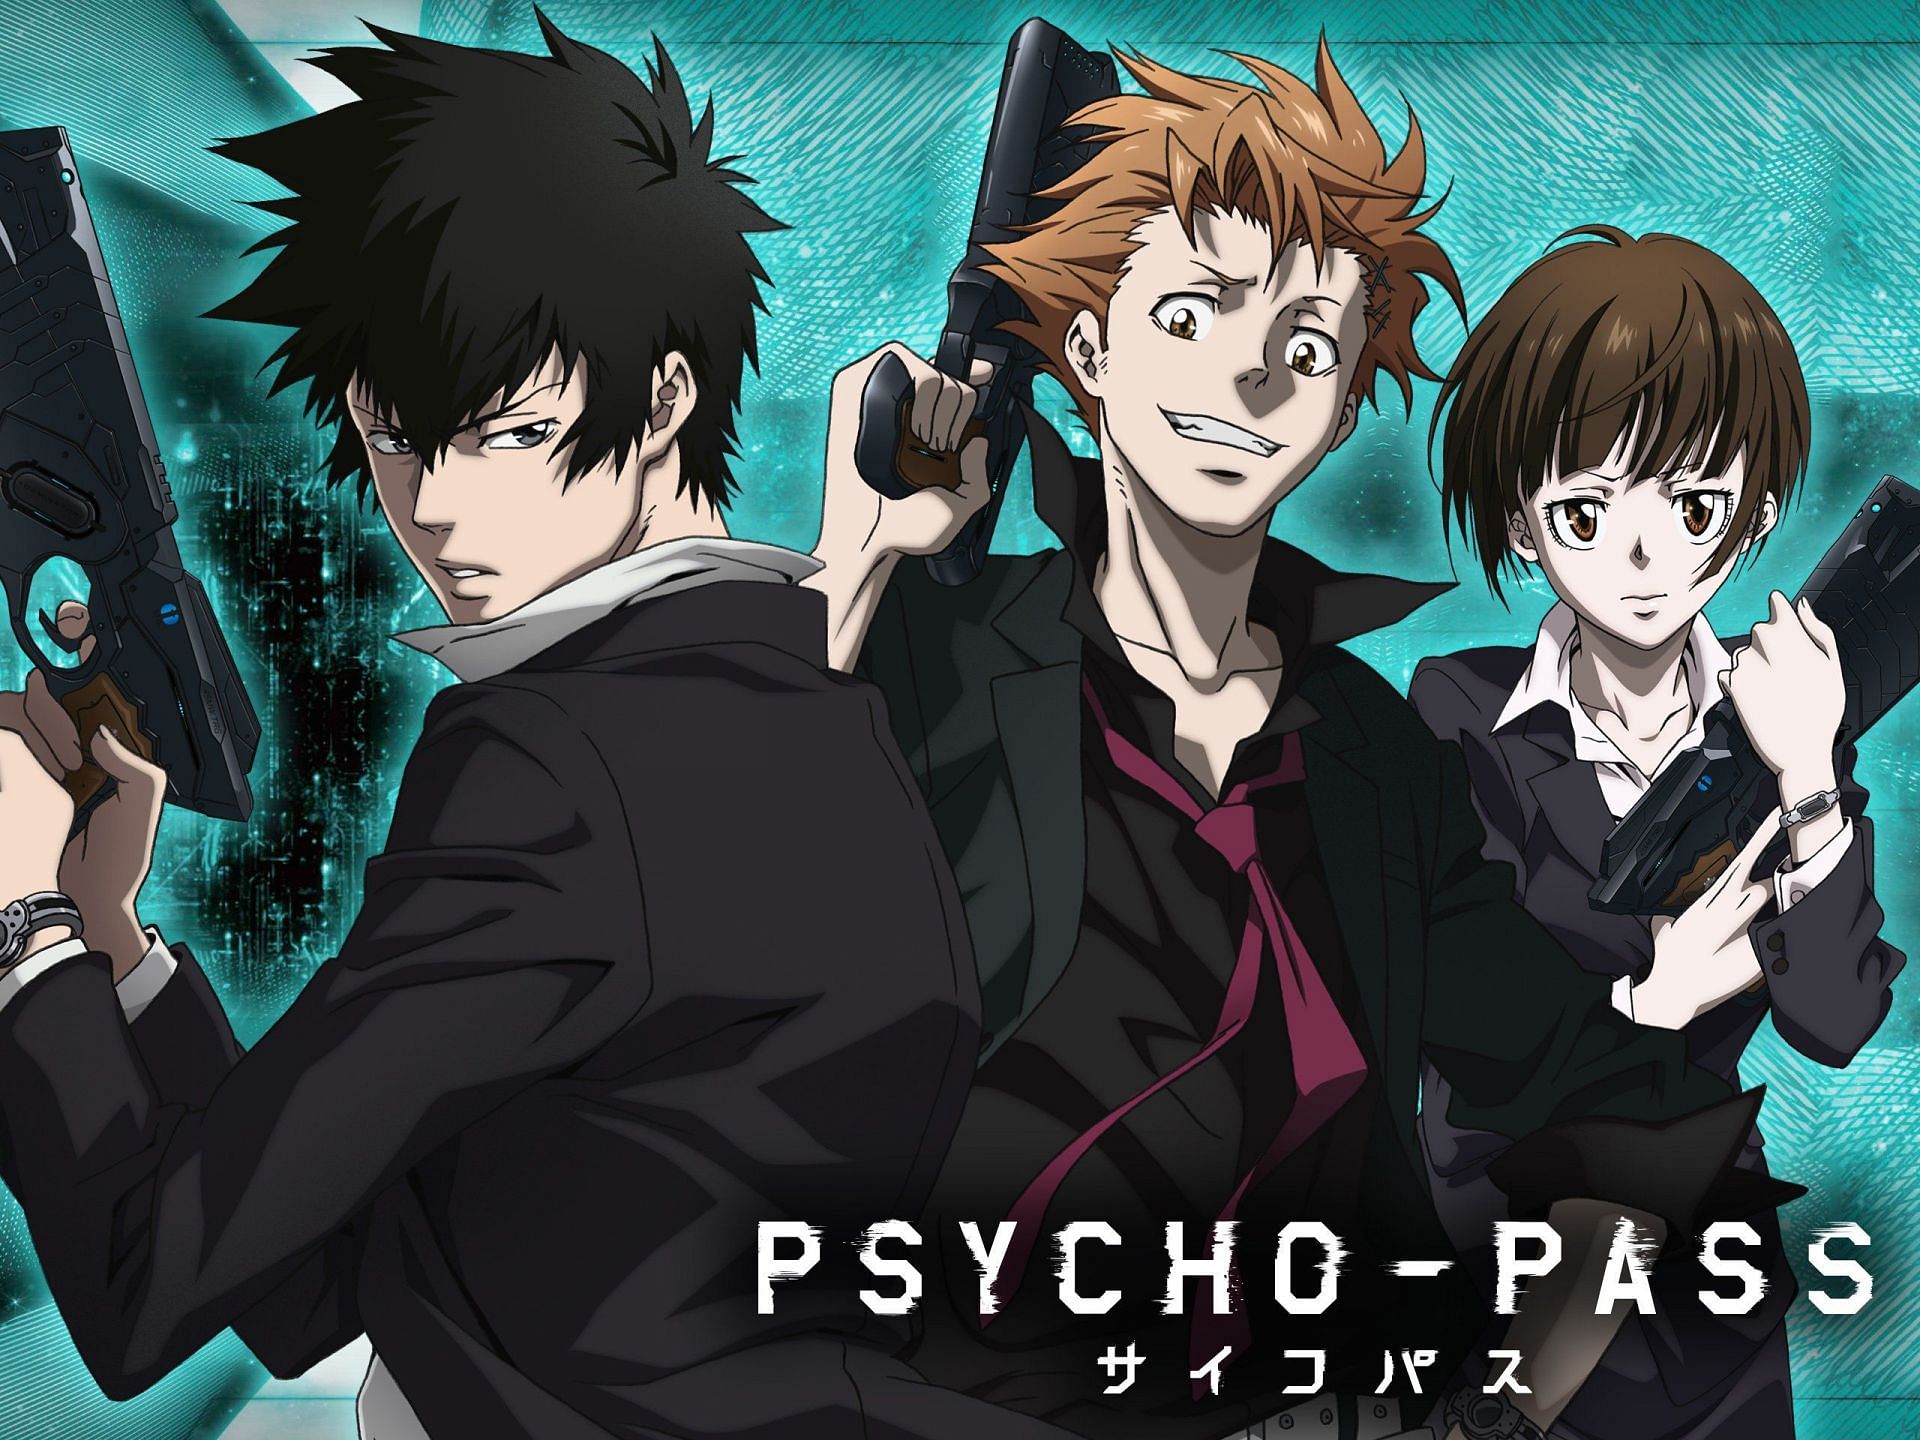 Psycho-Pass DVD cover/Main characters (Image via Production I.G.)